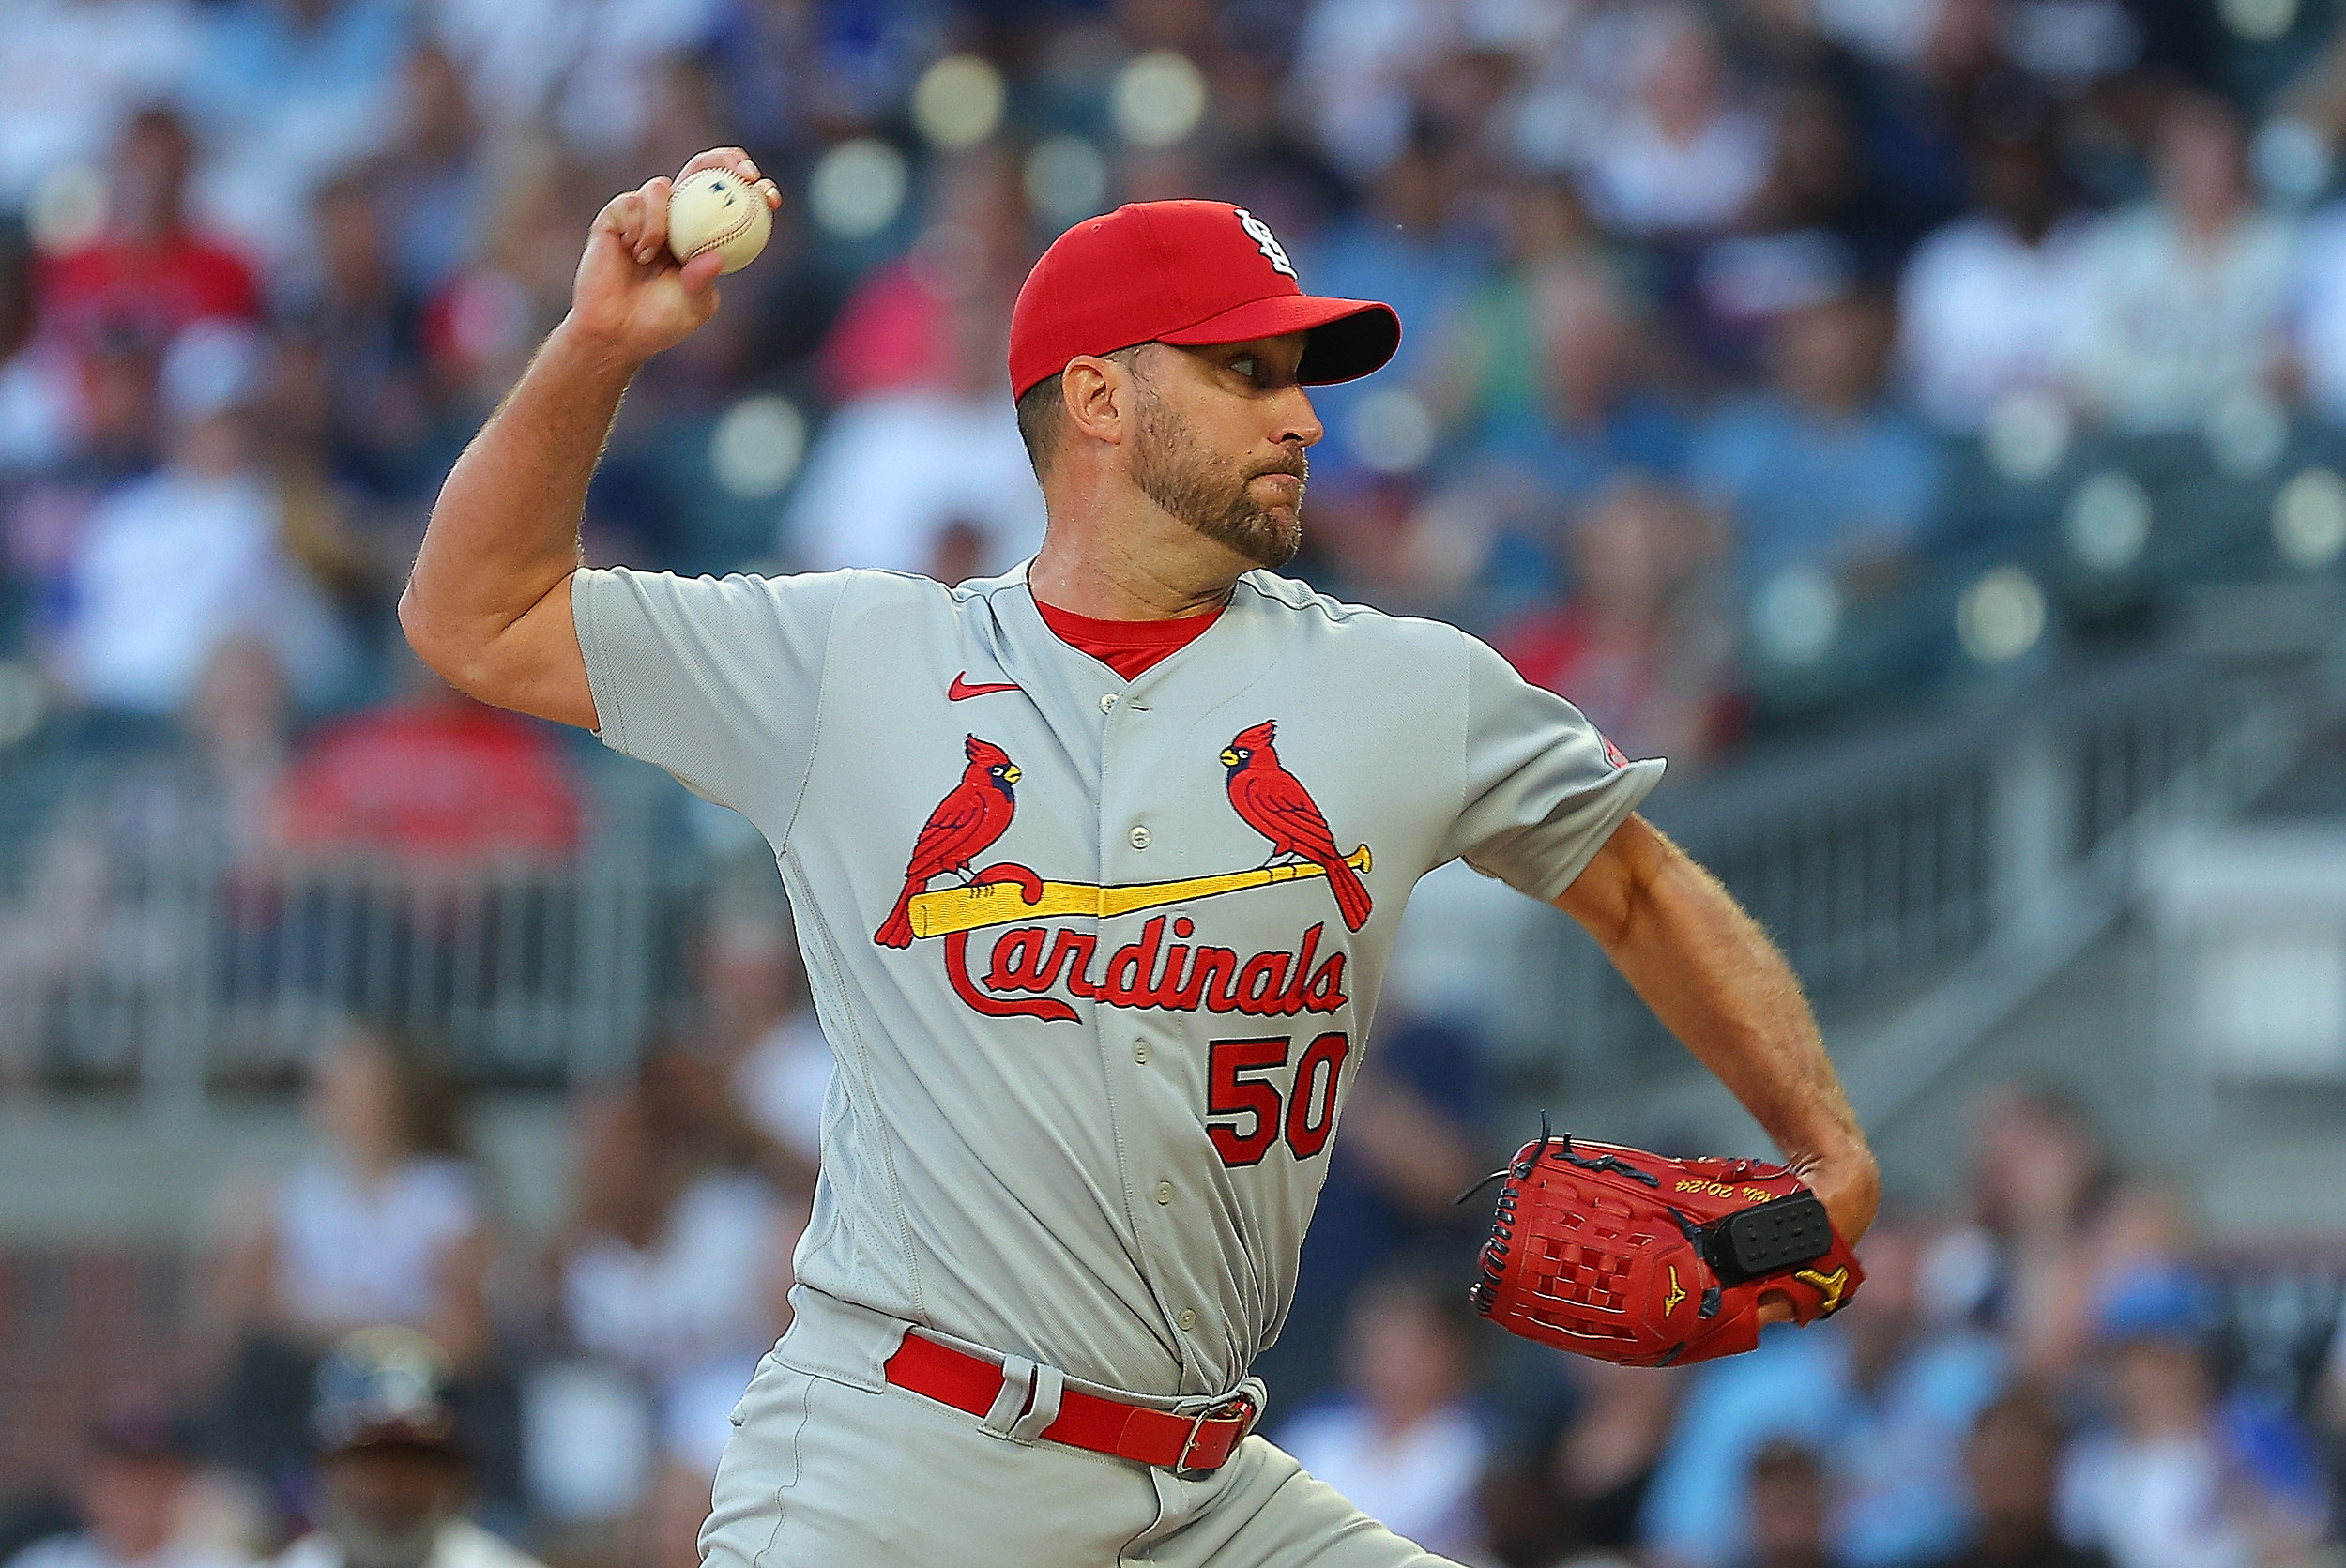 Has Wainwright already thrown his last pitch with the Cardinals?